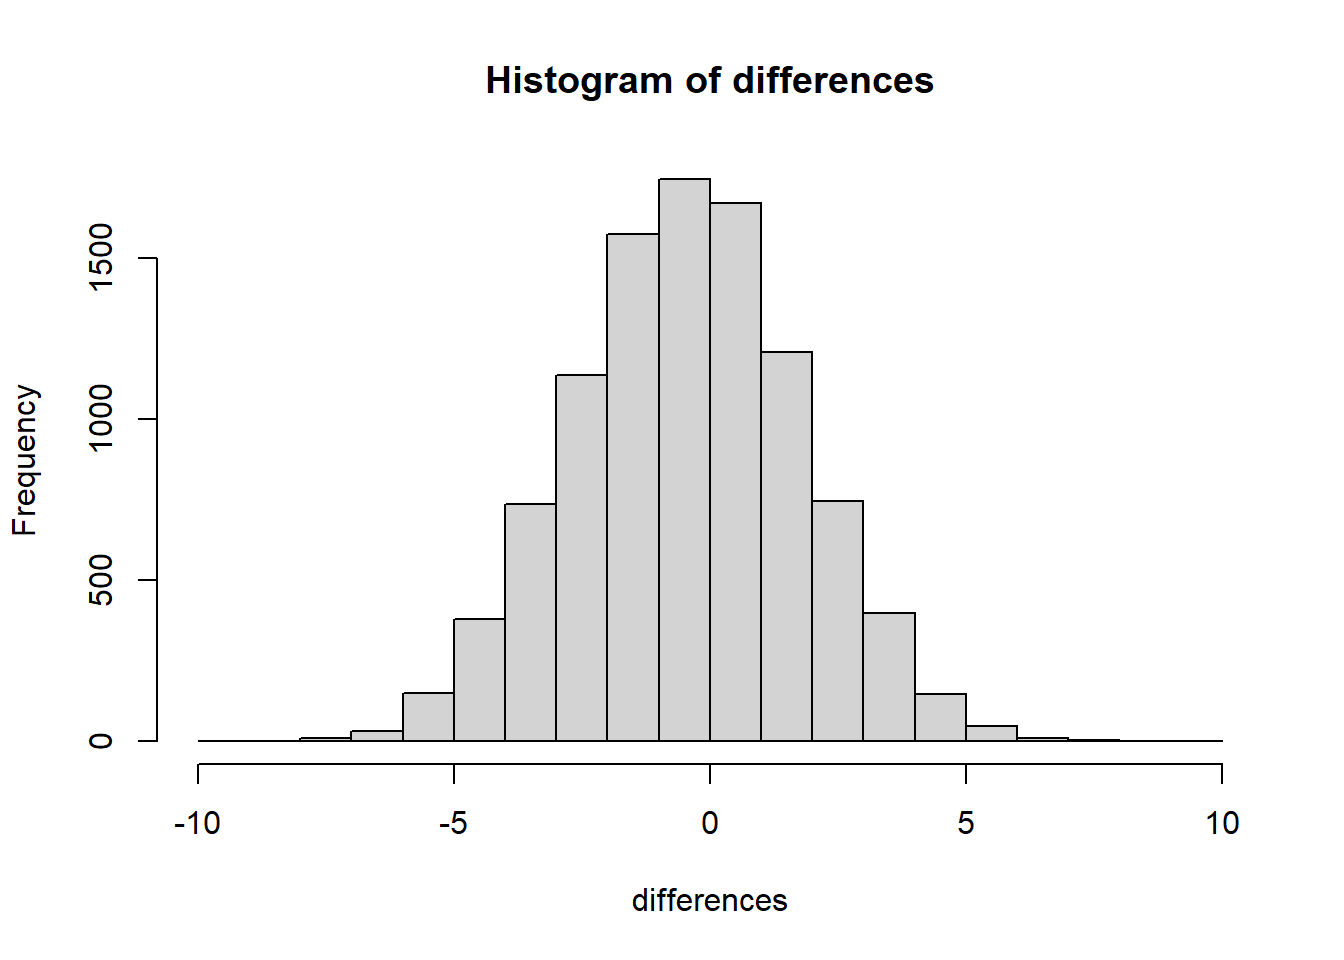 A histogram of the differences obtained by chance over 10,000 replications. The most frequency difference is 0, which is what we expect by chance. But the differences can be as large as -10 or +10. Larger differences occur less often by chance. Chance can't do everything